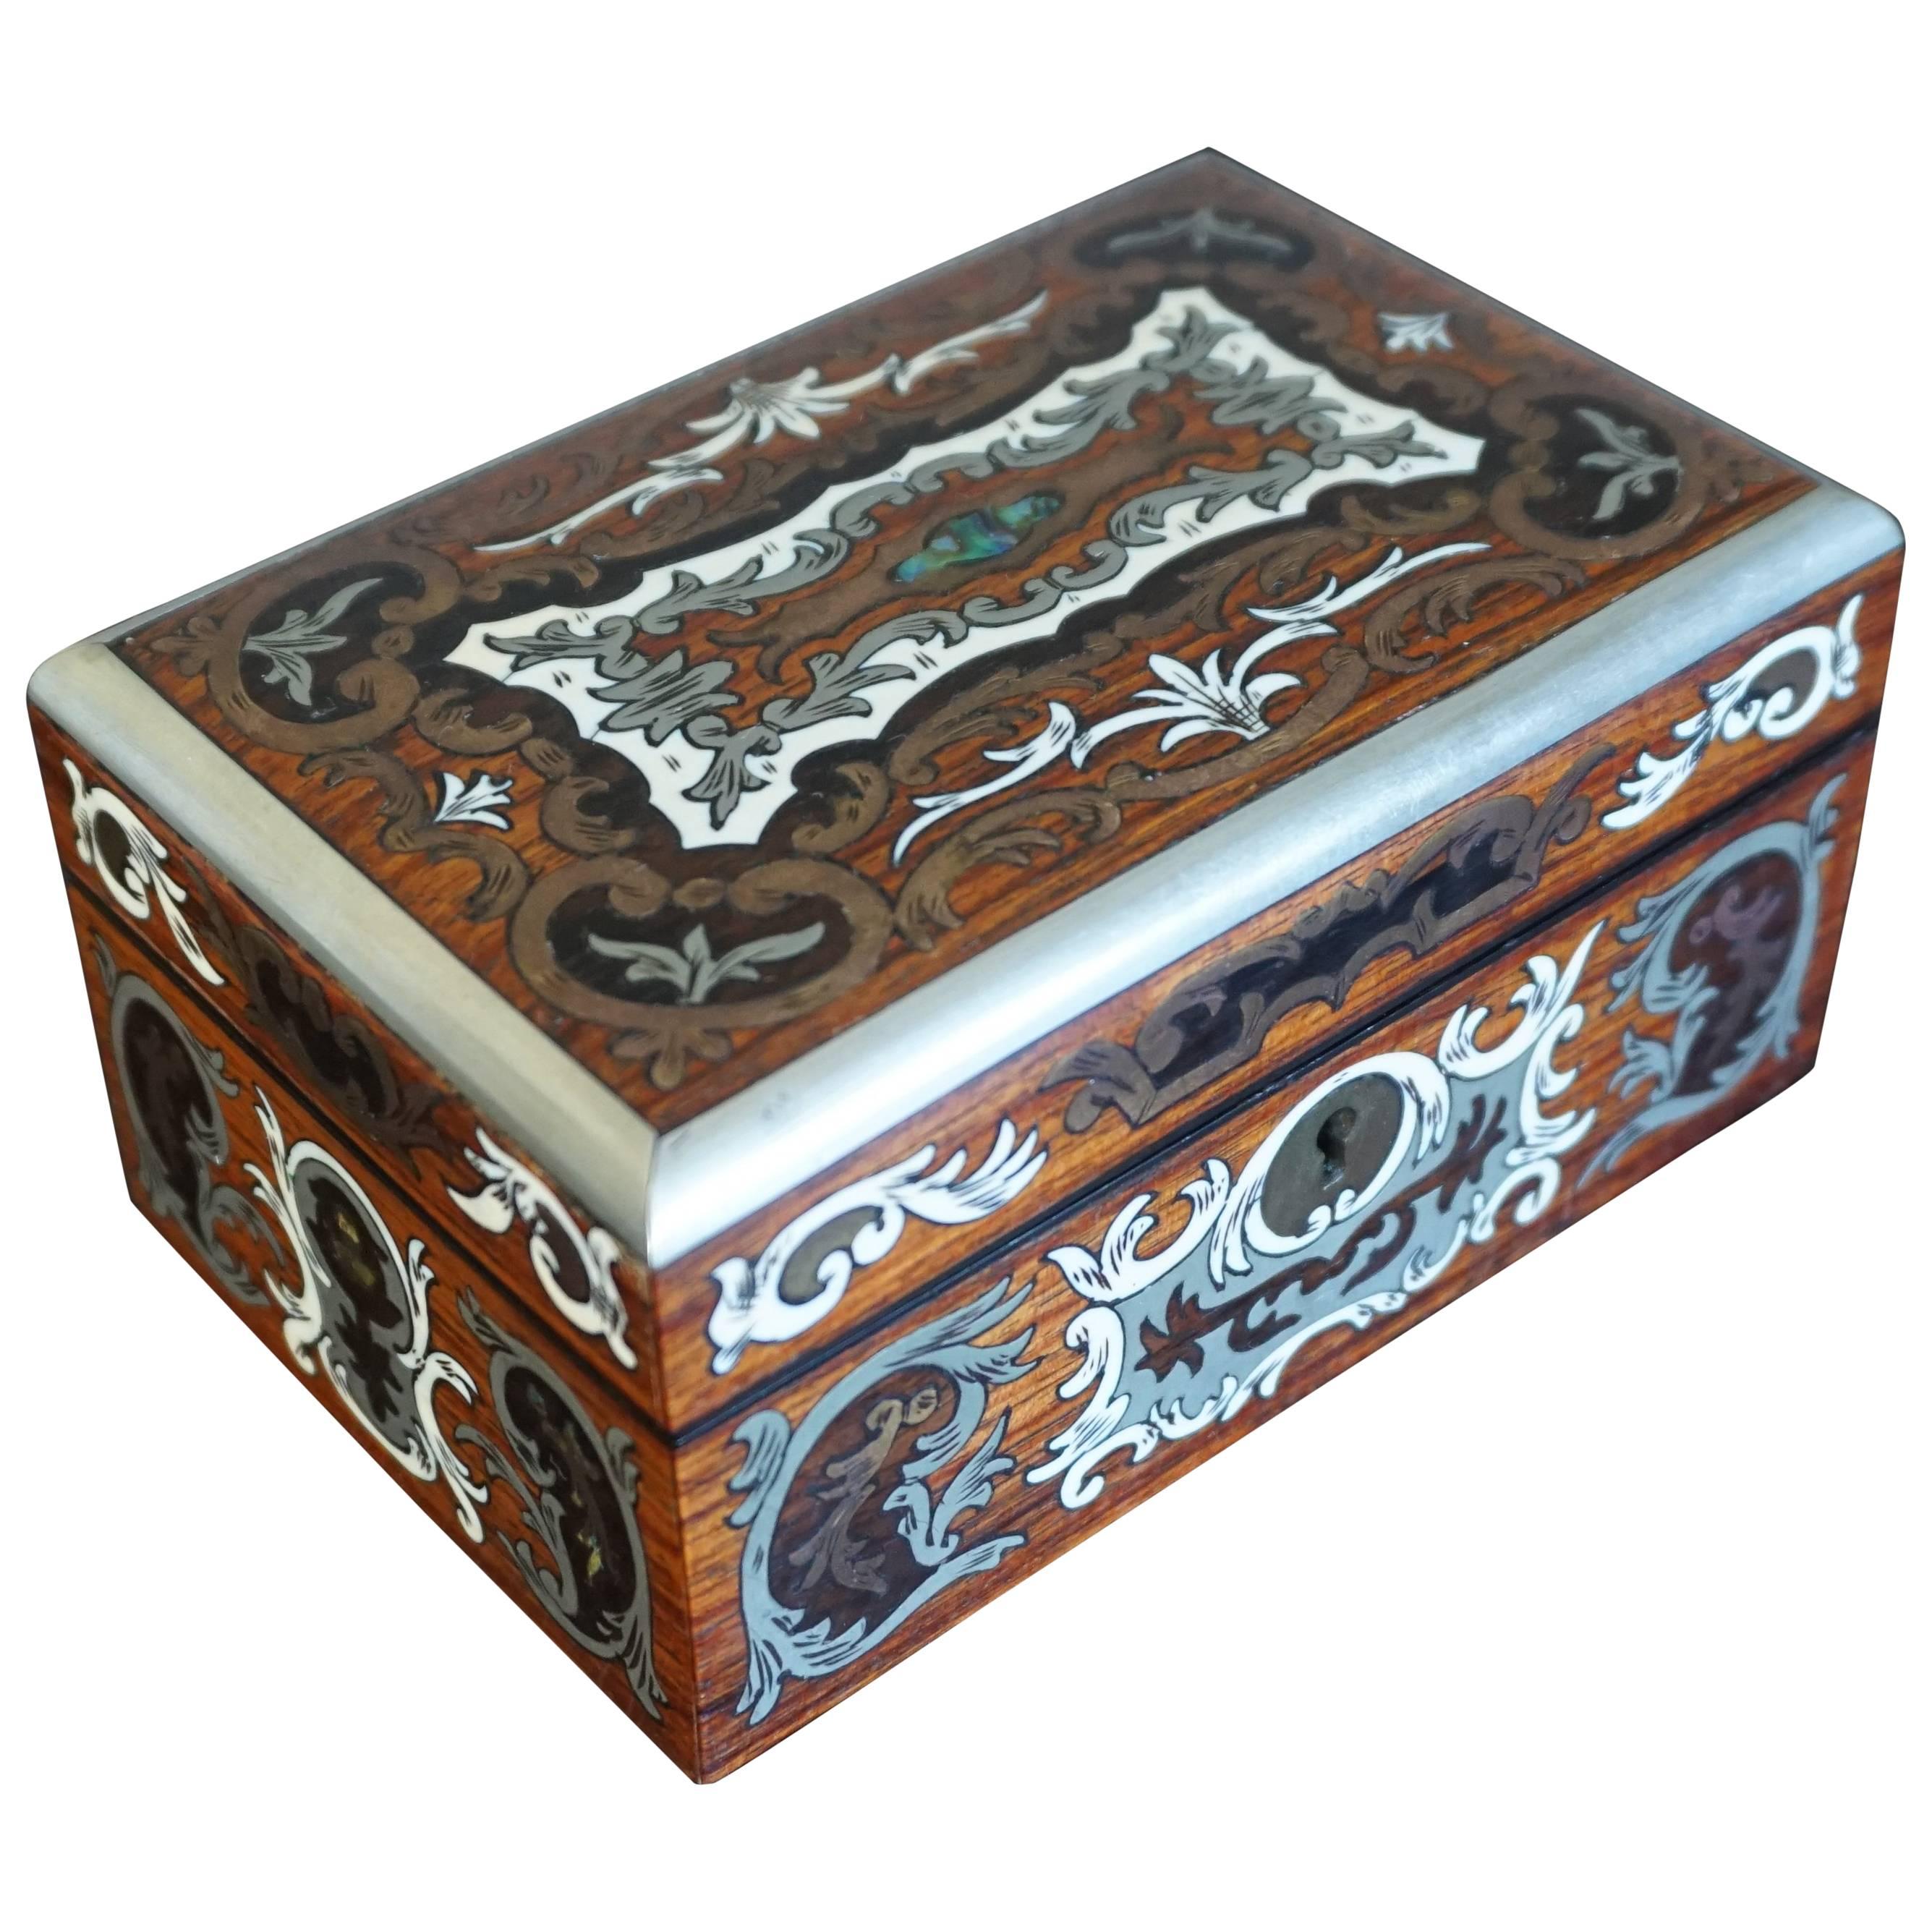 Stunning Antique Box Inlaid with Amazing Motifs in Silver, Bone, Mother-of-Pearl